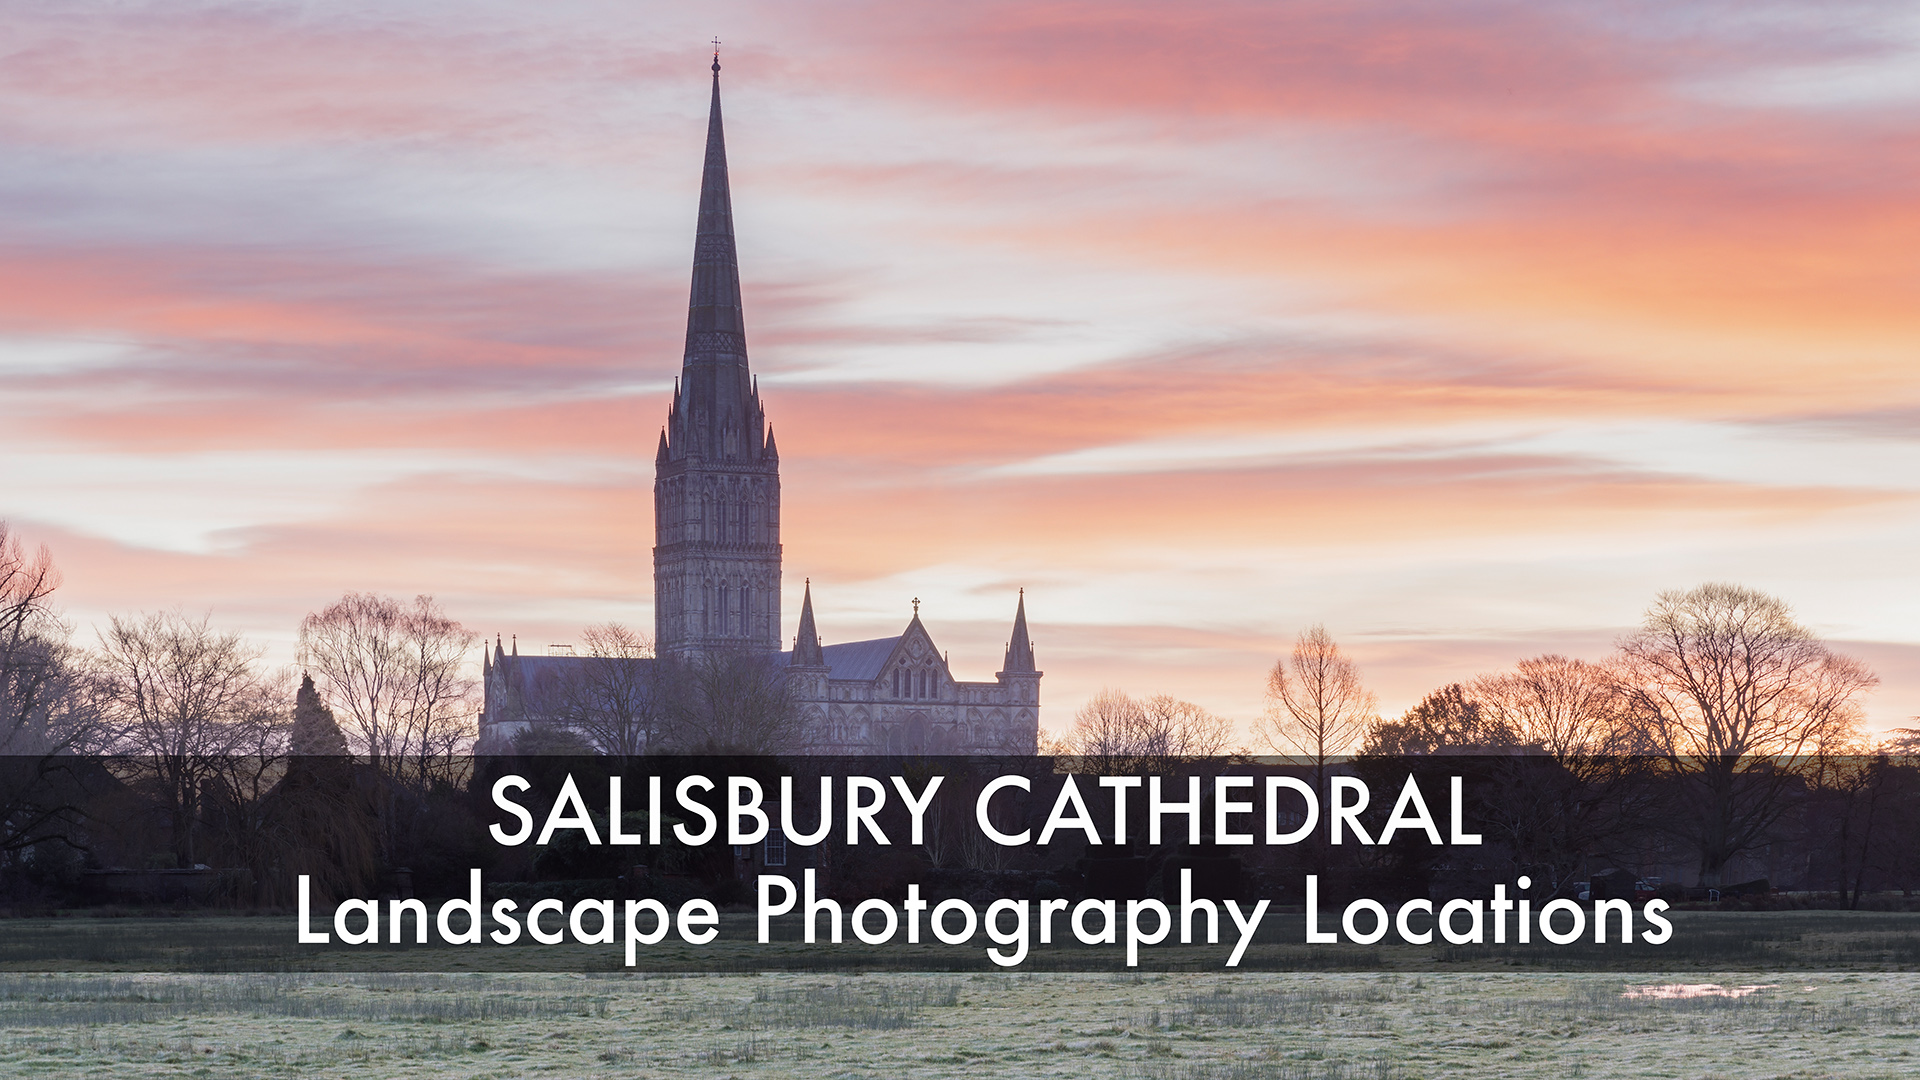 Salisbury cathedral Locations for landscape photography.